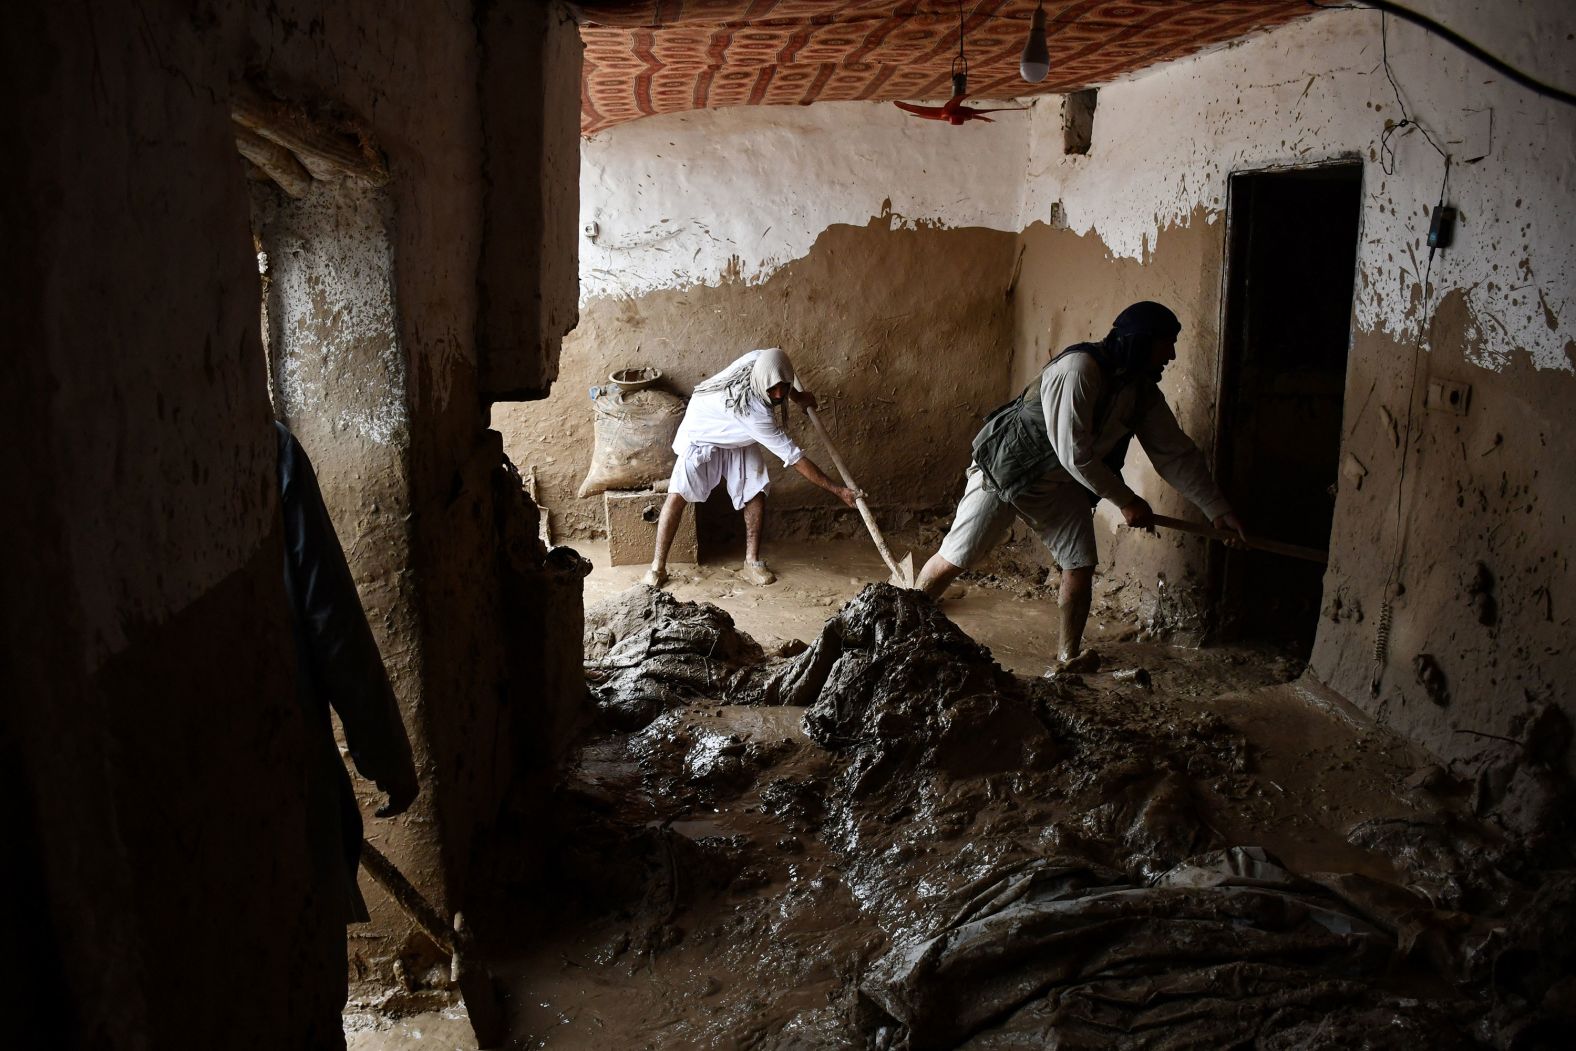 Men shovel mud from a house on Saturday, May 11, after flash floods in Afghanistan's Baghlan province. At least 300 people have died in <a href="index.php?page=&url=https%3A%2F%2Fwww.cnn.com%2F2024%2F05%2F11%2Fasia%2Fflash-floods-kill-hundreds-afghanistan-intl%2Findex.html" target="_blank">flash flooding</a> that has ravaged northern Afghanistan in recent days, the World Food Programme said on Sunday.